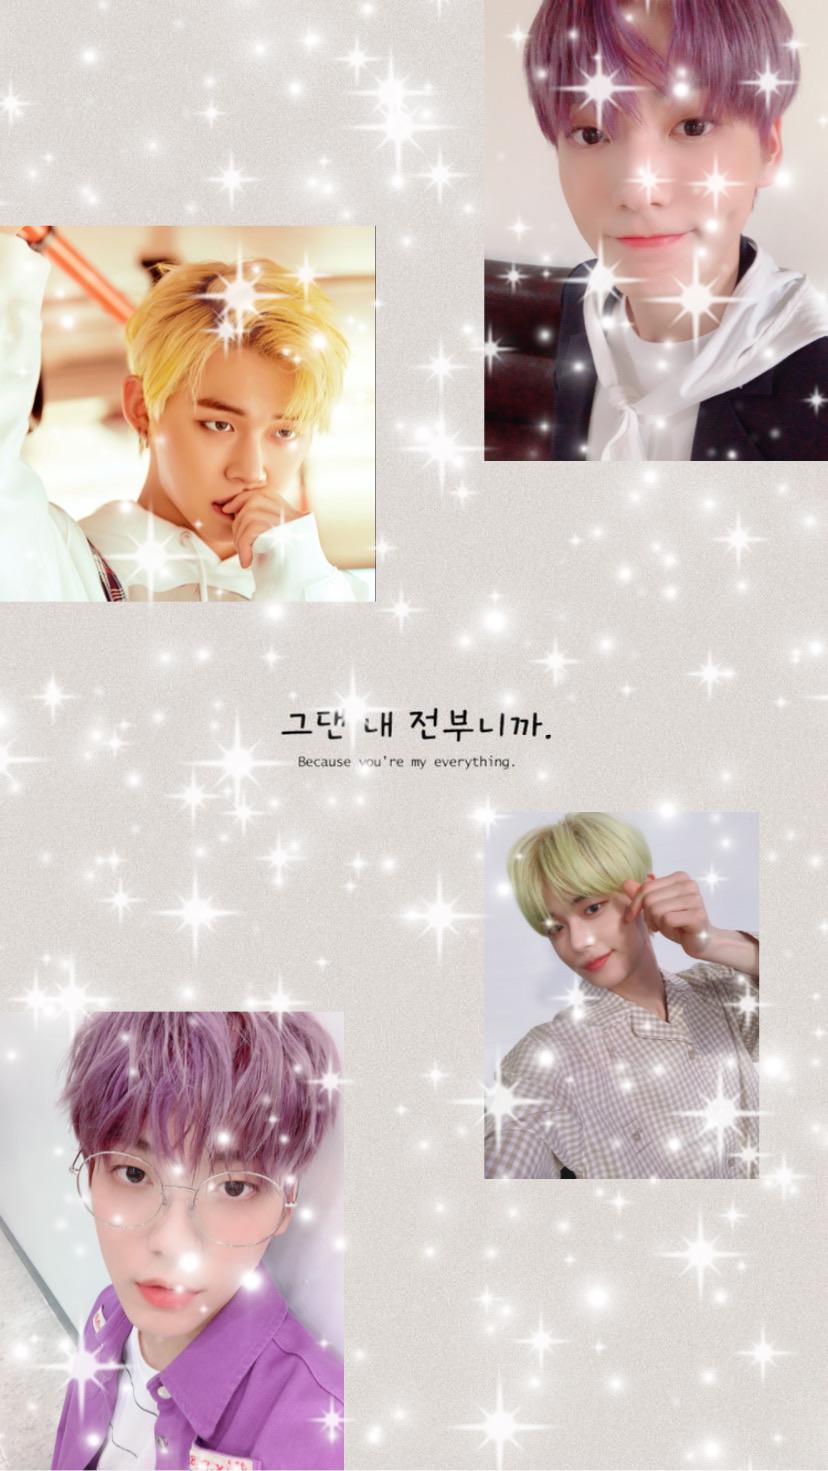 I made a Soobin and Yeonjun wallpaper because they're my 2 biases